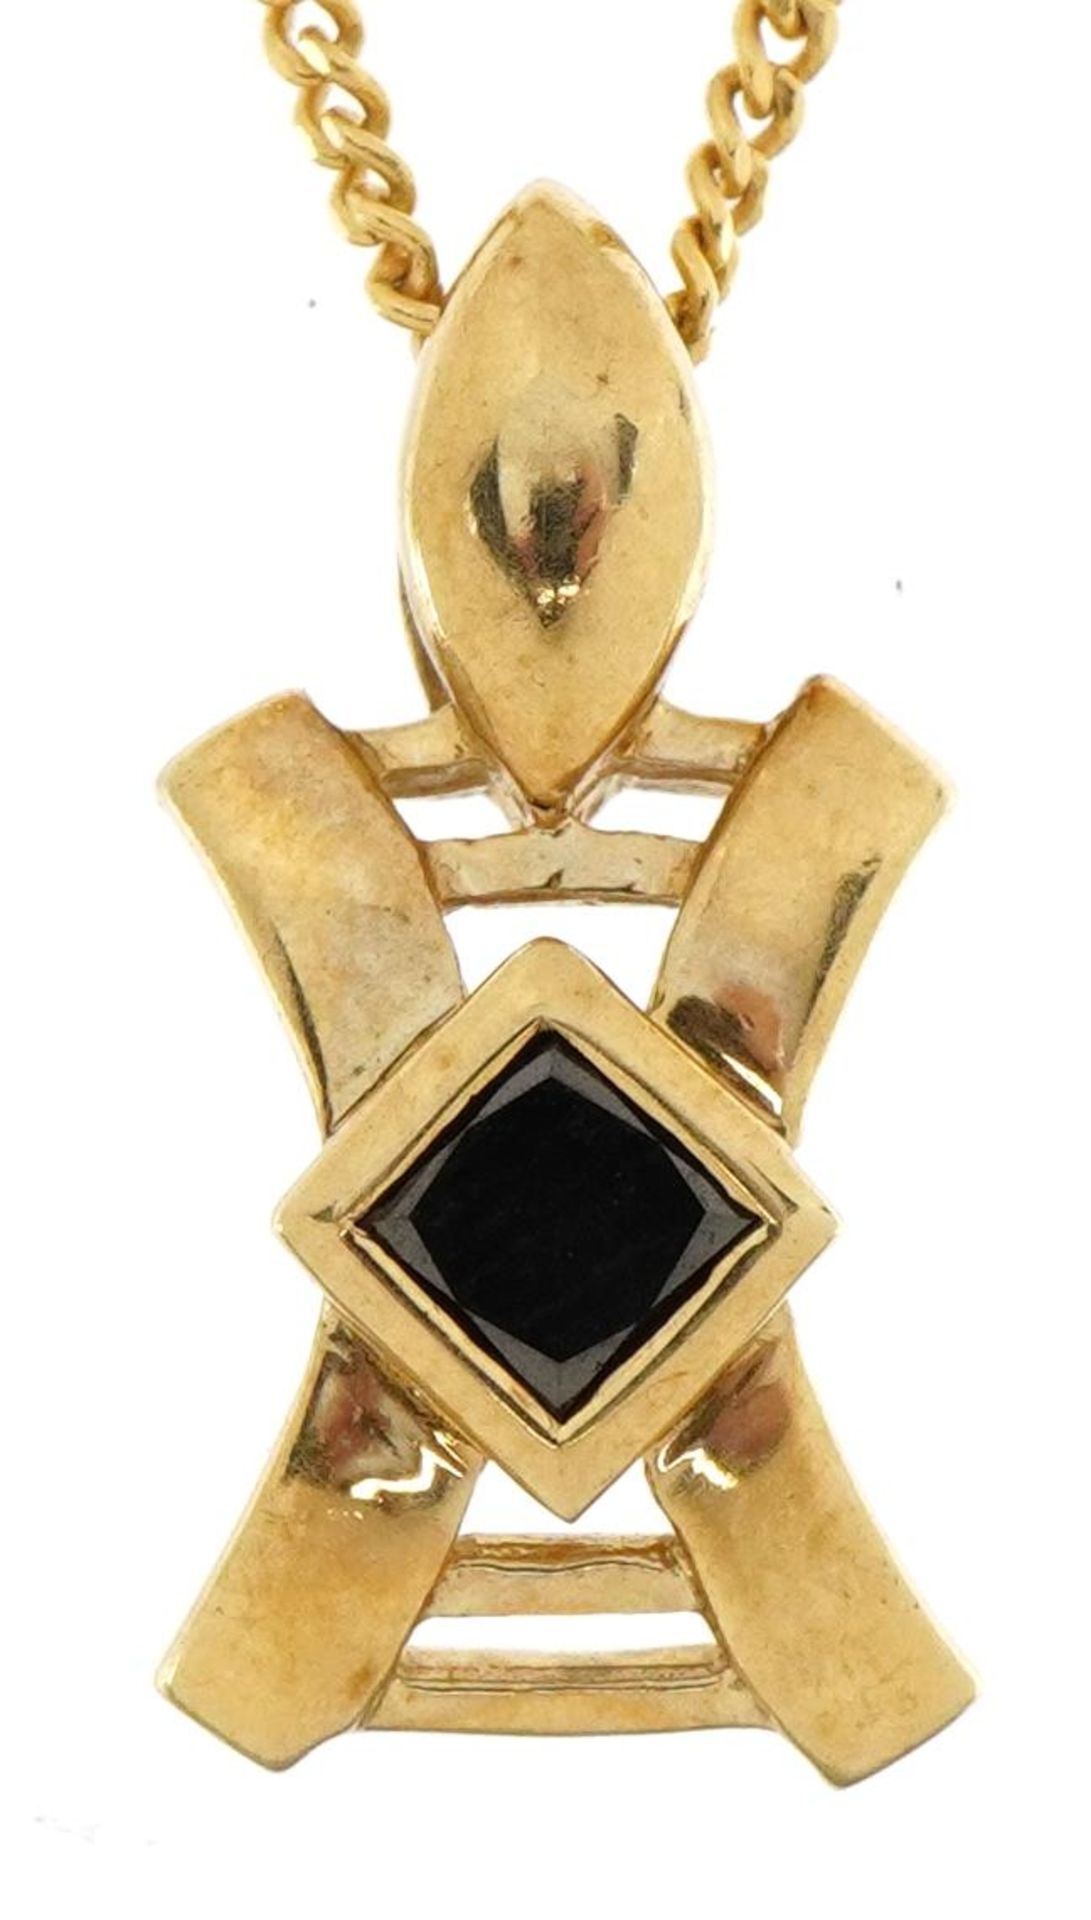 9ct gold pendant set with a black stone, possibly black diamond, on a 9ct gold diamond curb link